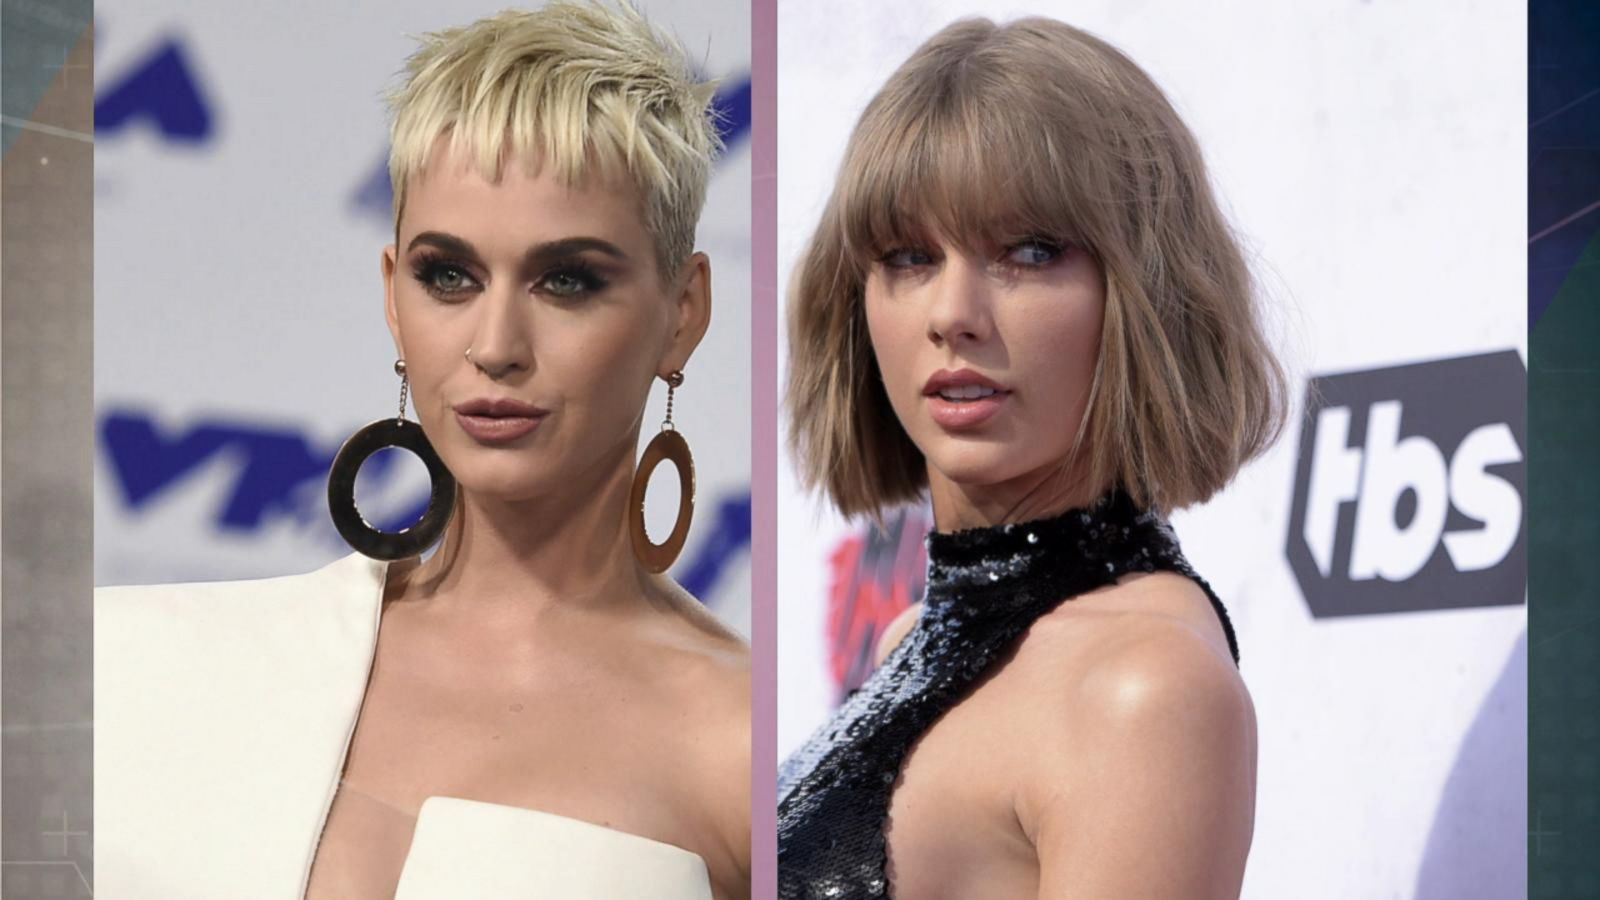 VIDEO: Katy Perry and Taylor Swift reportedly end longstanding feud